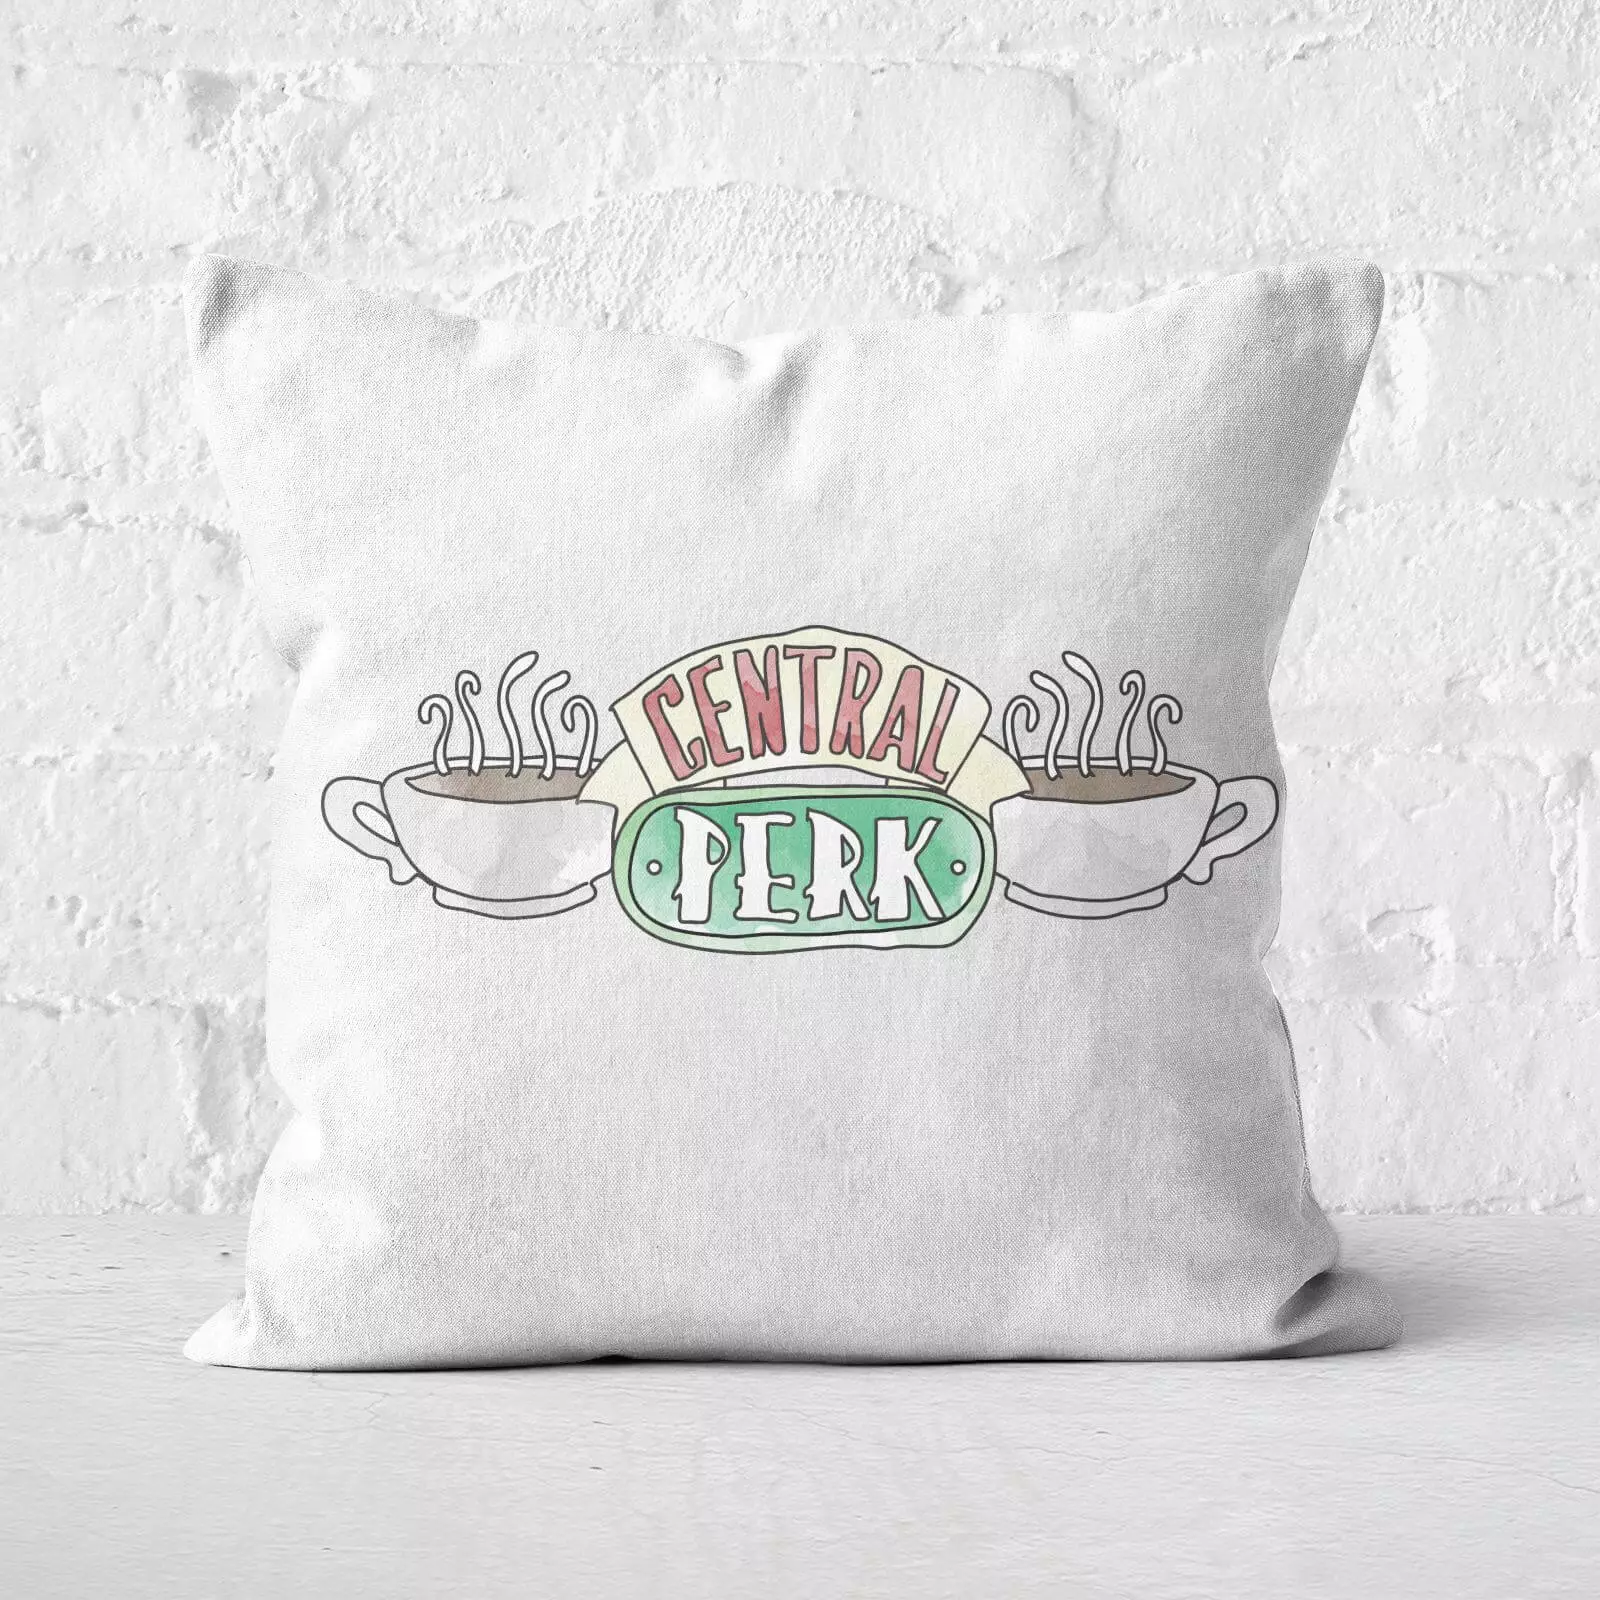 We love the 'Central Perk' square cushion (